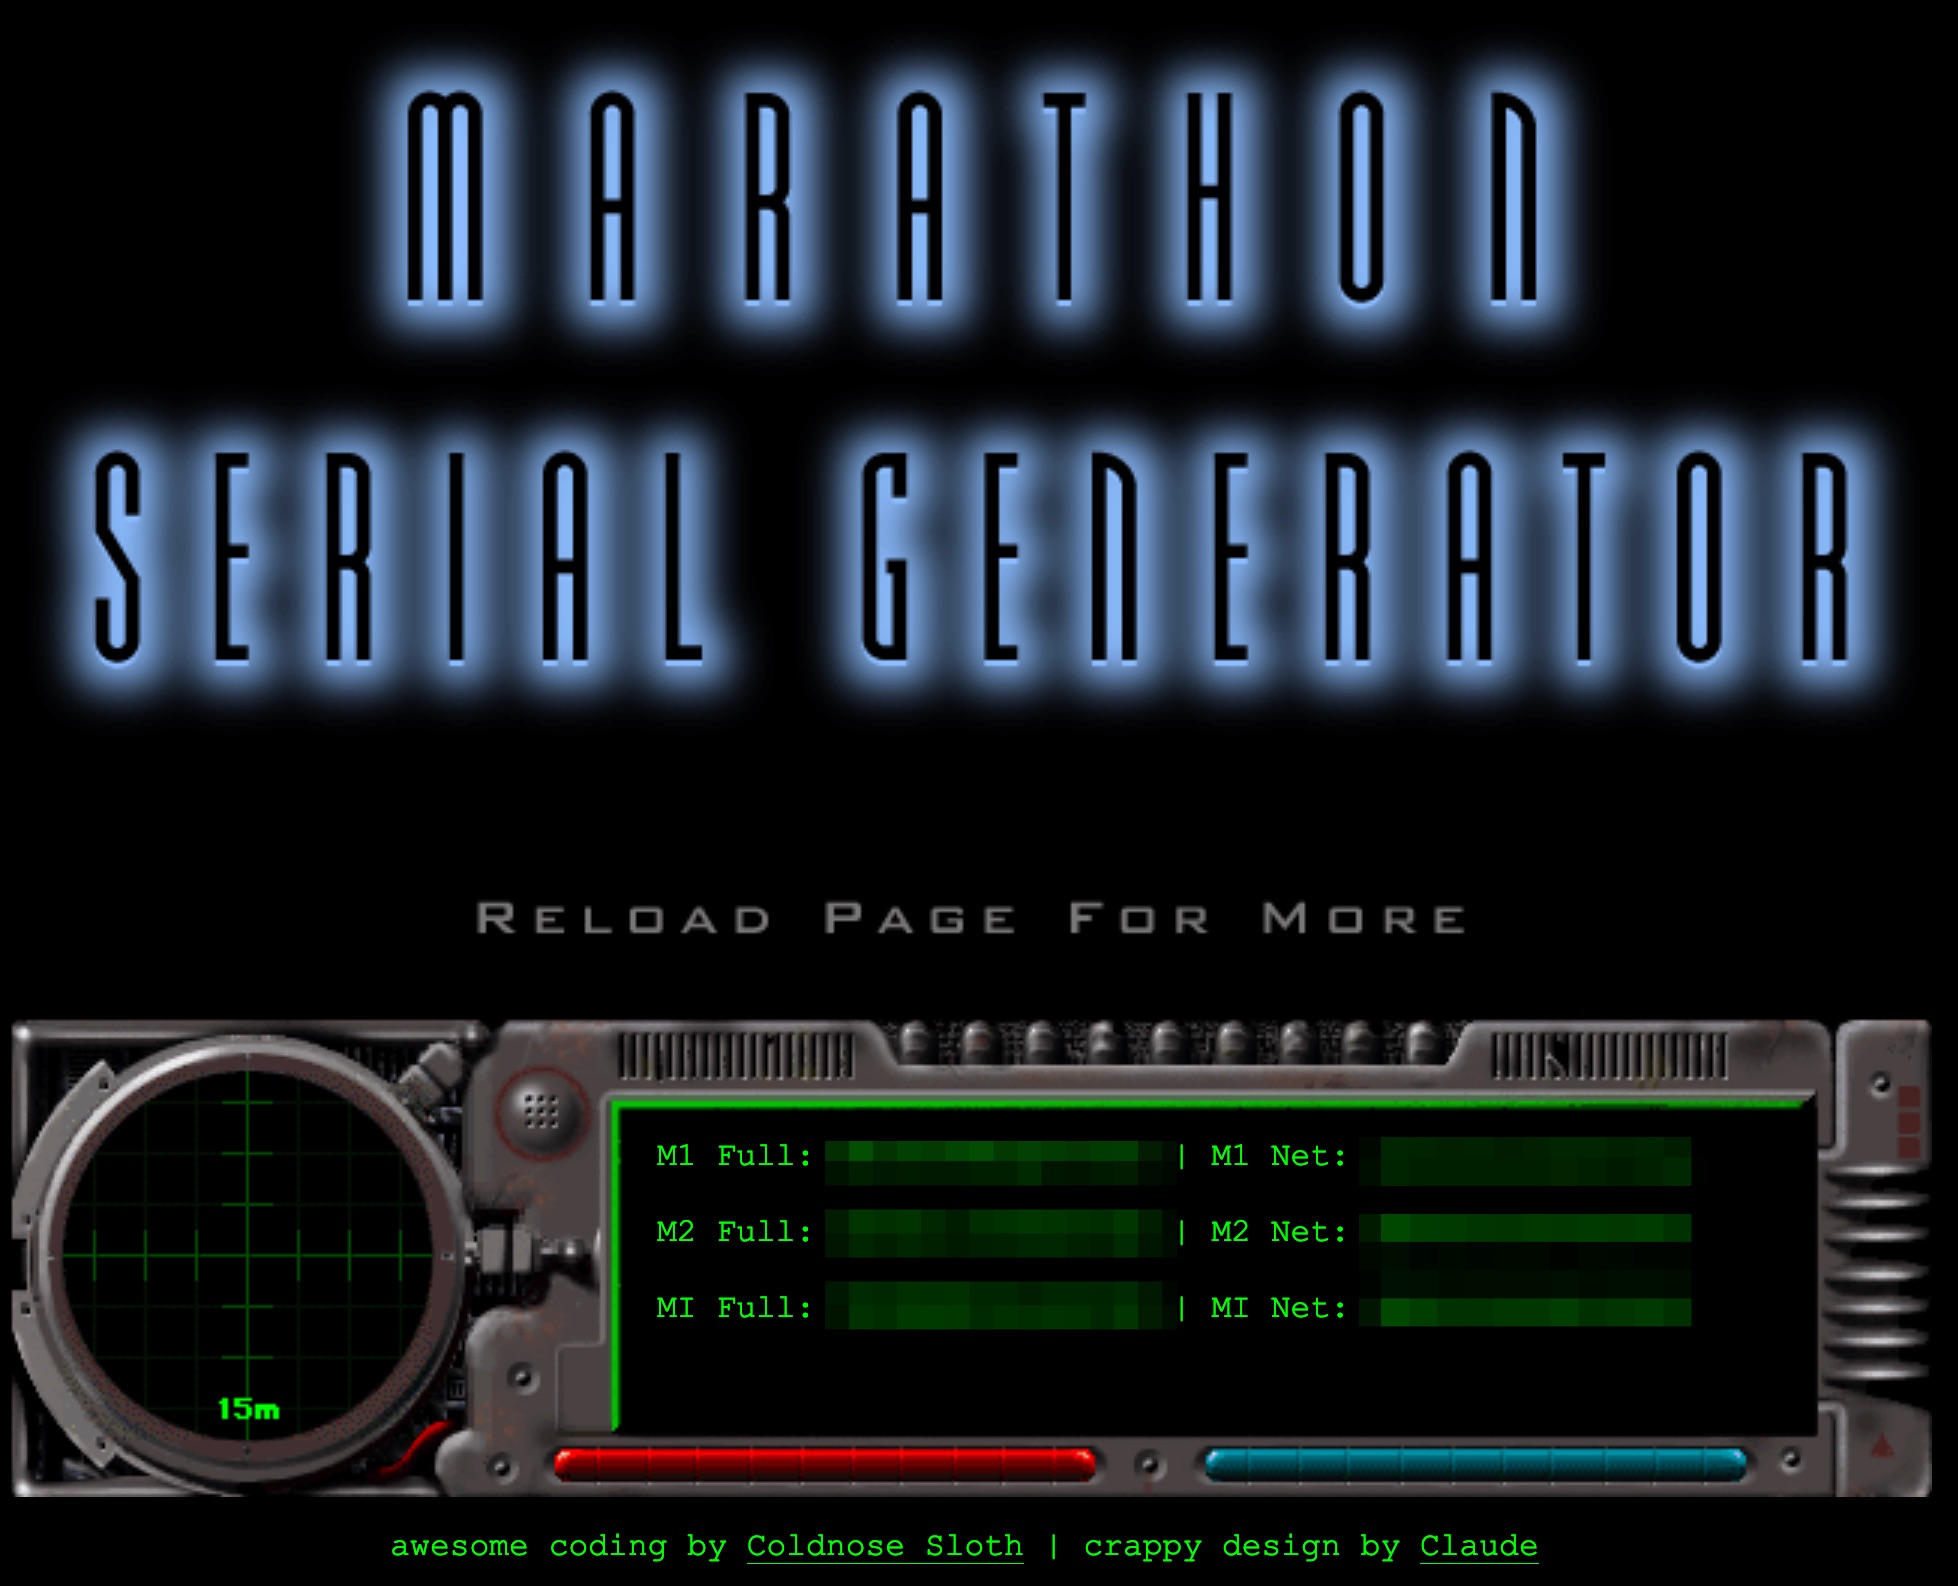 The Marathon Serial Generator, with generated serial numbers blurred out